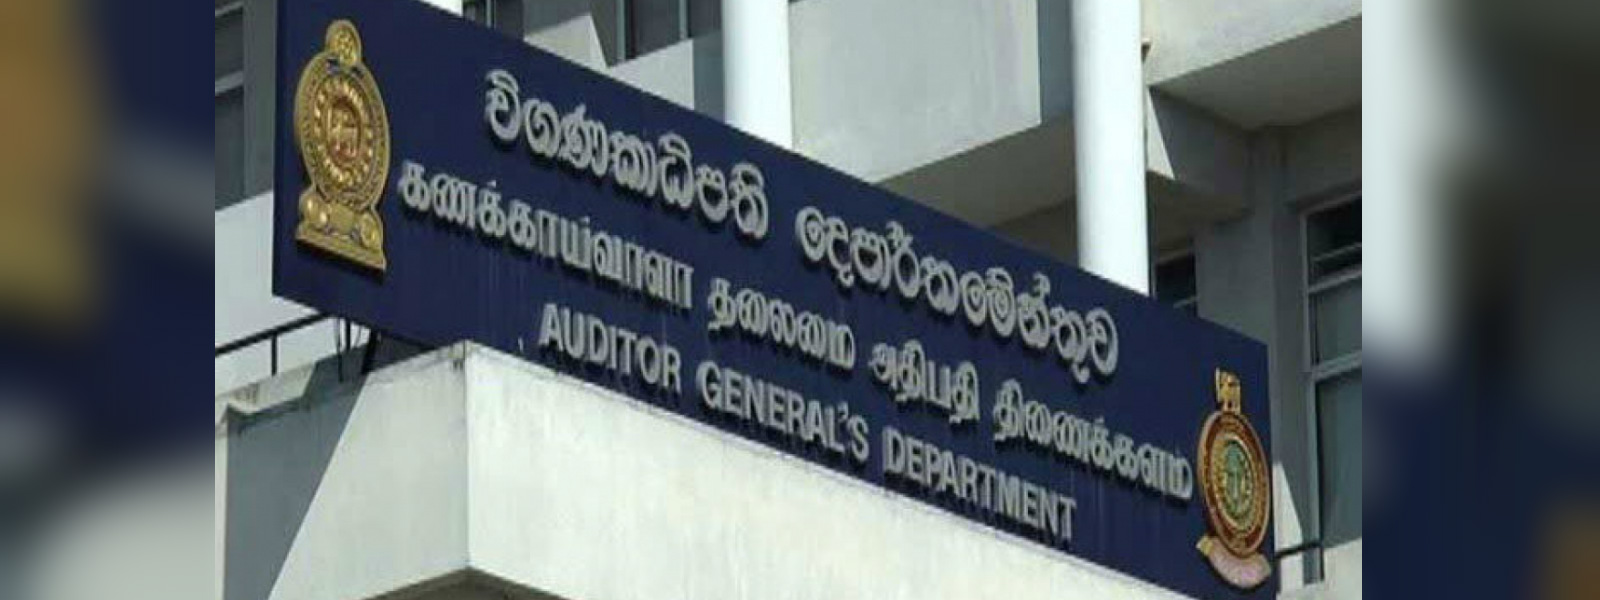 Auditor General to investigate misuse of State resources for election activities